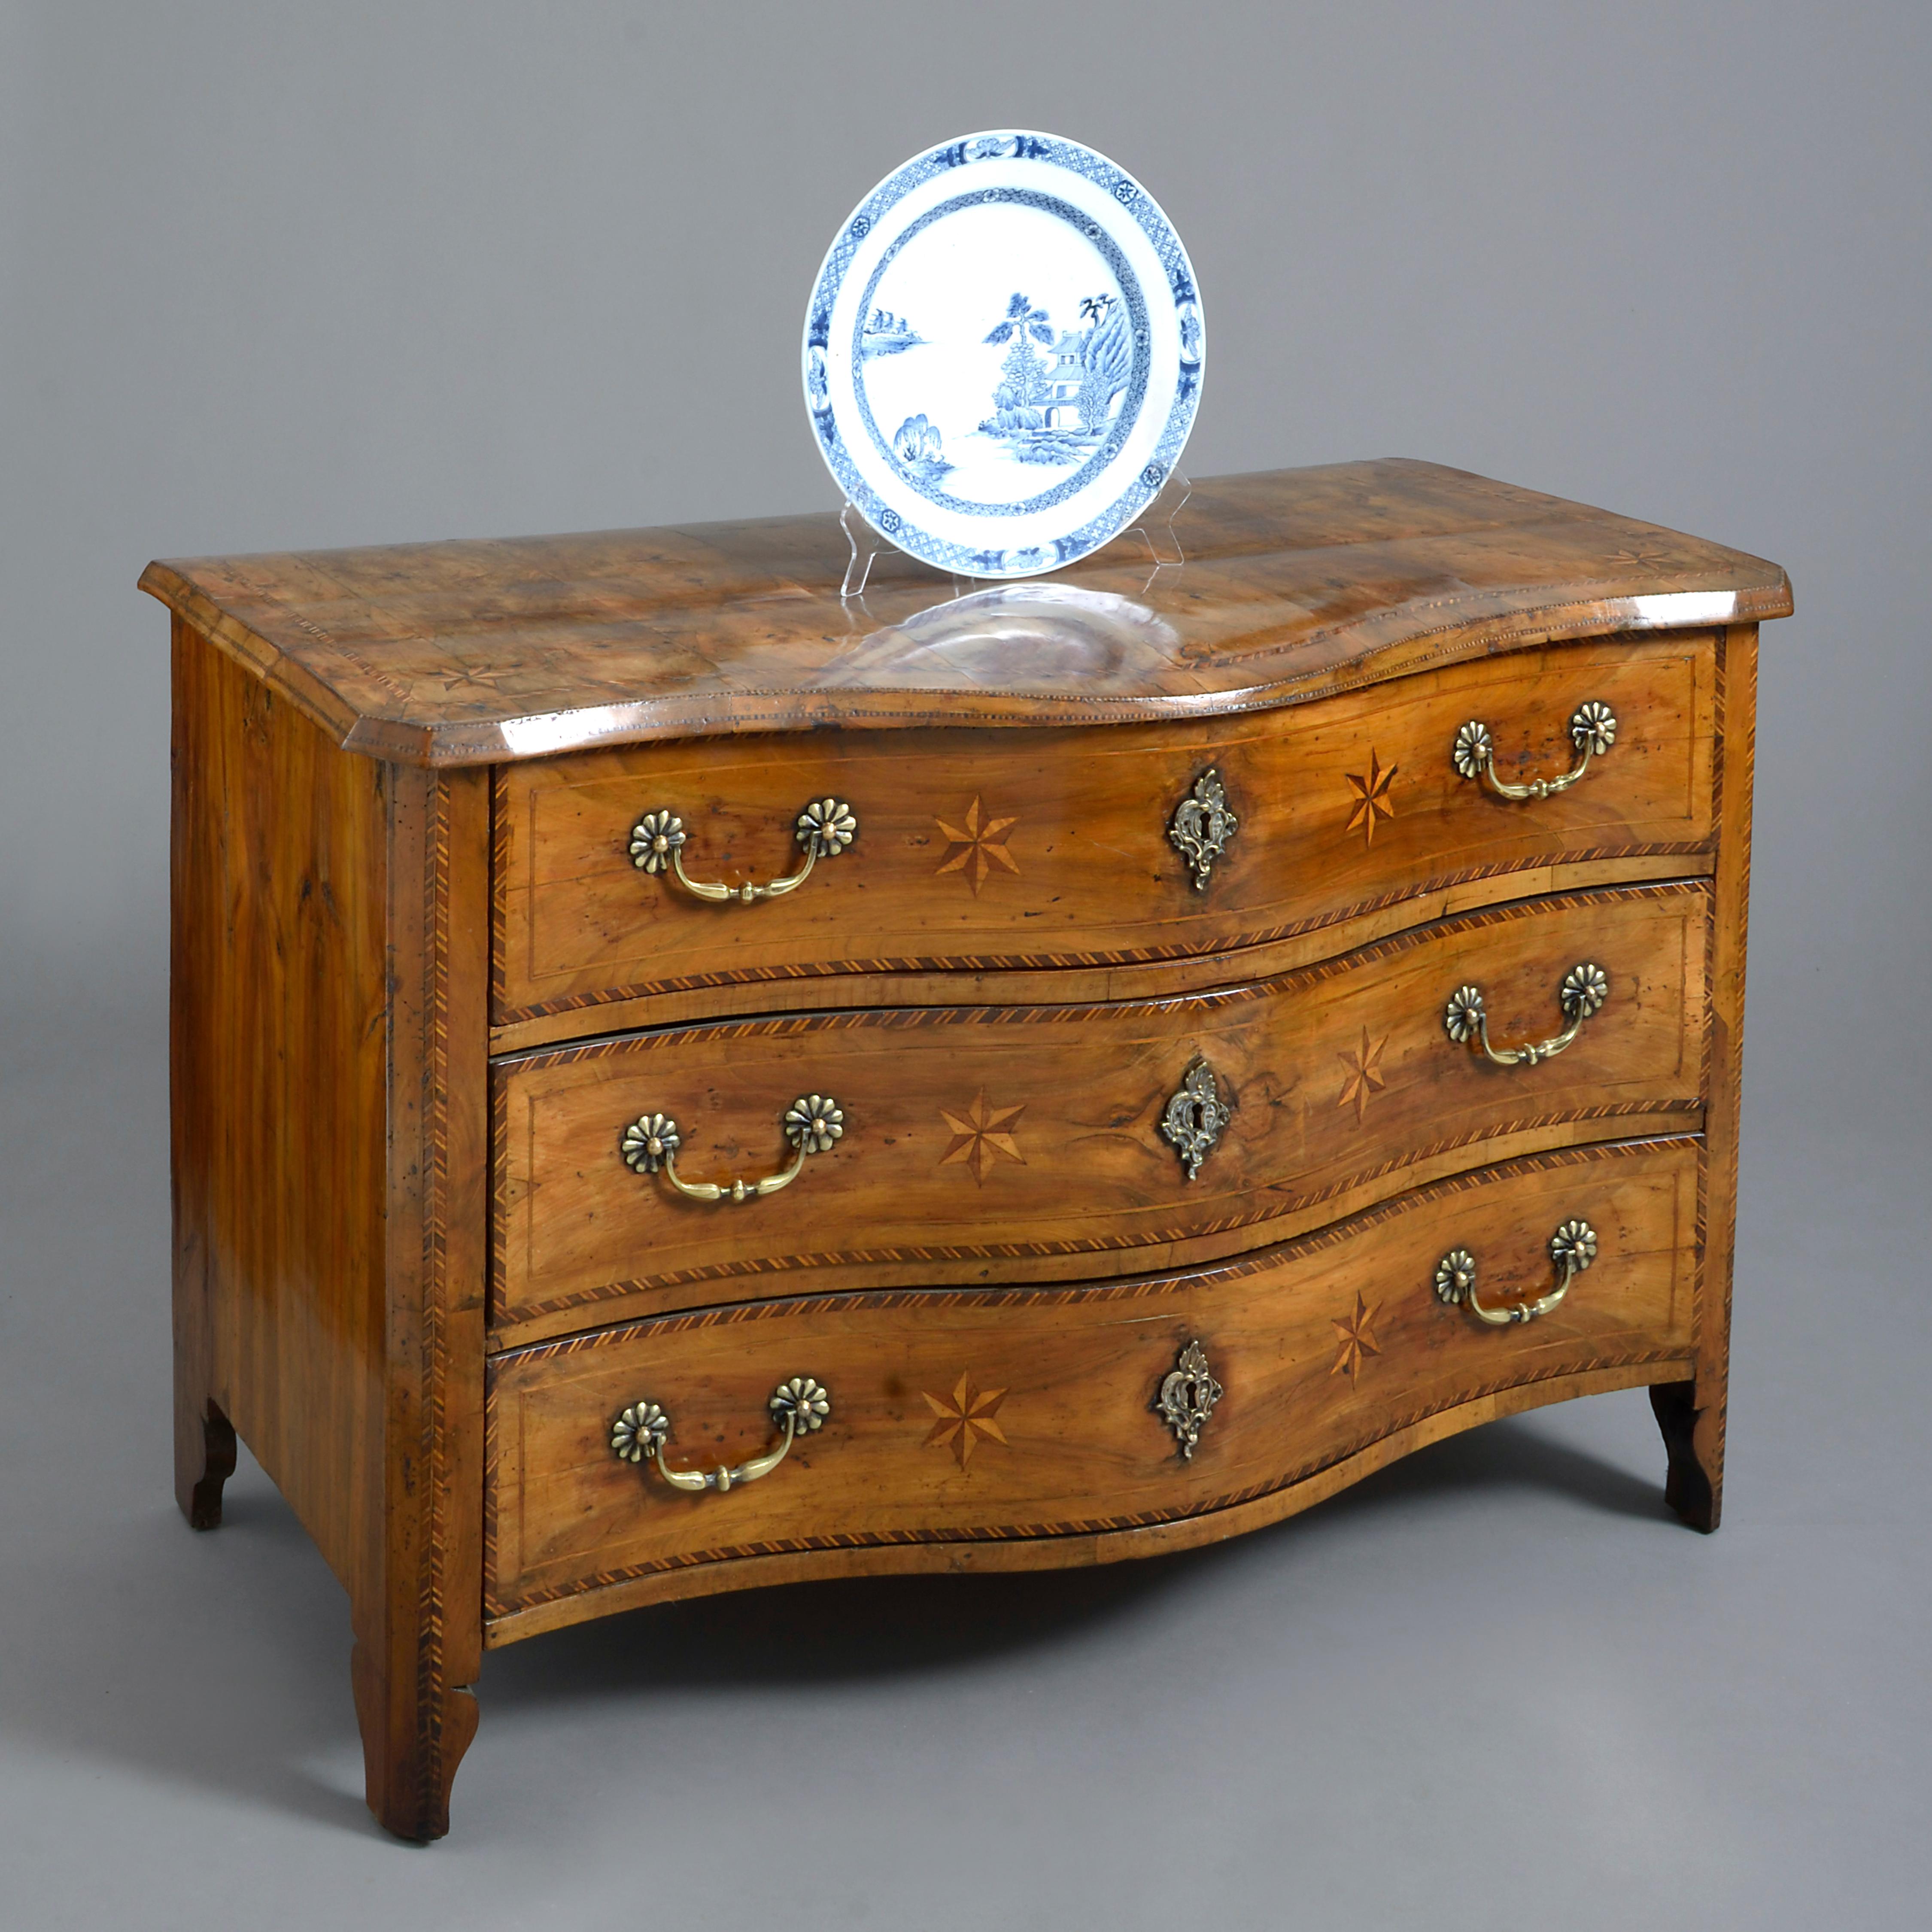 A fine late 18th century walnut commode of serpentine form and exceptional colour, the top and three drawers with parquetry inlay of stringing and stars, having brass handles and lock escutcheons and all raised upon bracket feet.